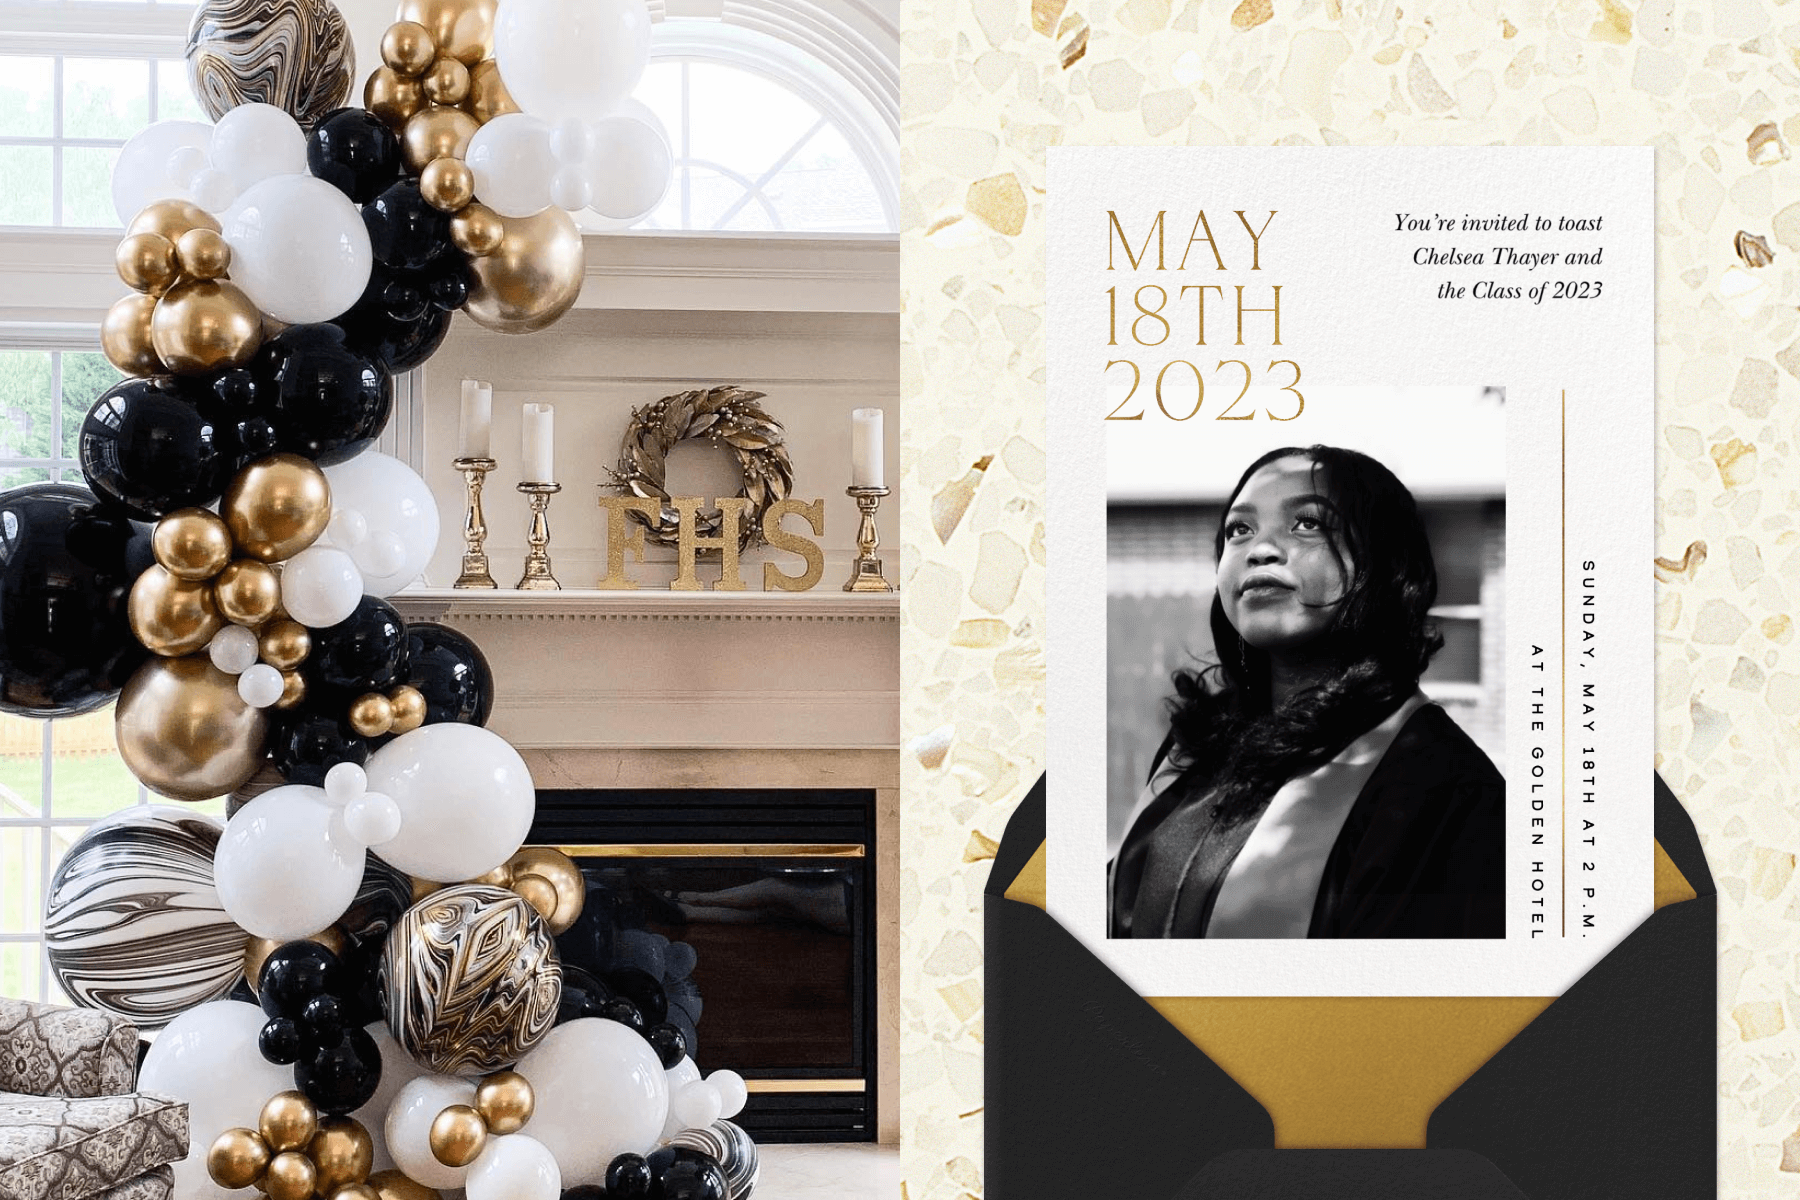 Left: A black, white, and gold balloon installation floats from the floor to the ceiling in front of a modern fireplace. Right: A graduation party invitation with a black and white photo of a young woman in a robe beneath the date of her graduation party.